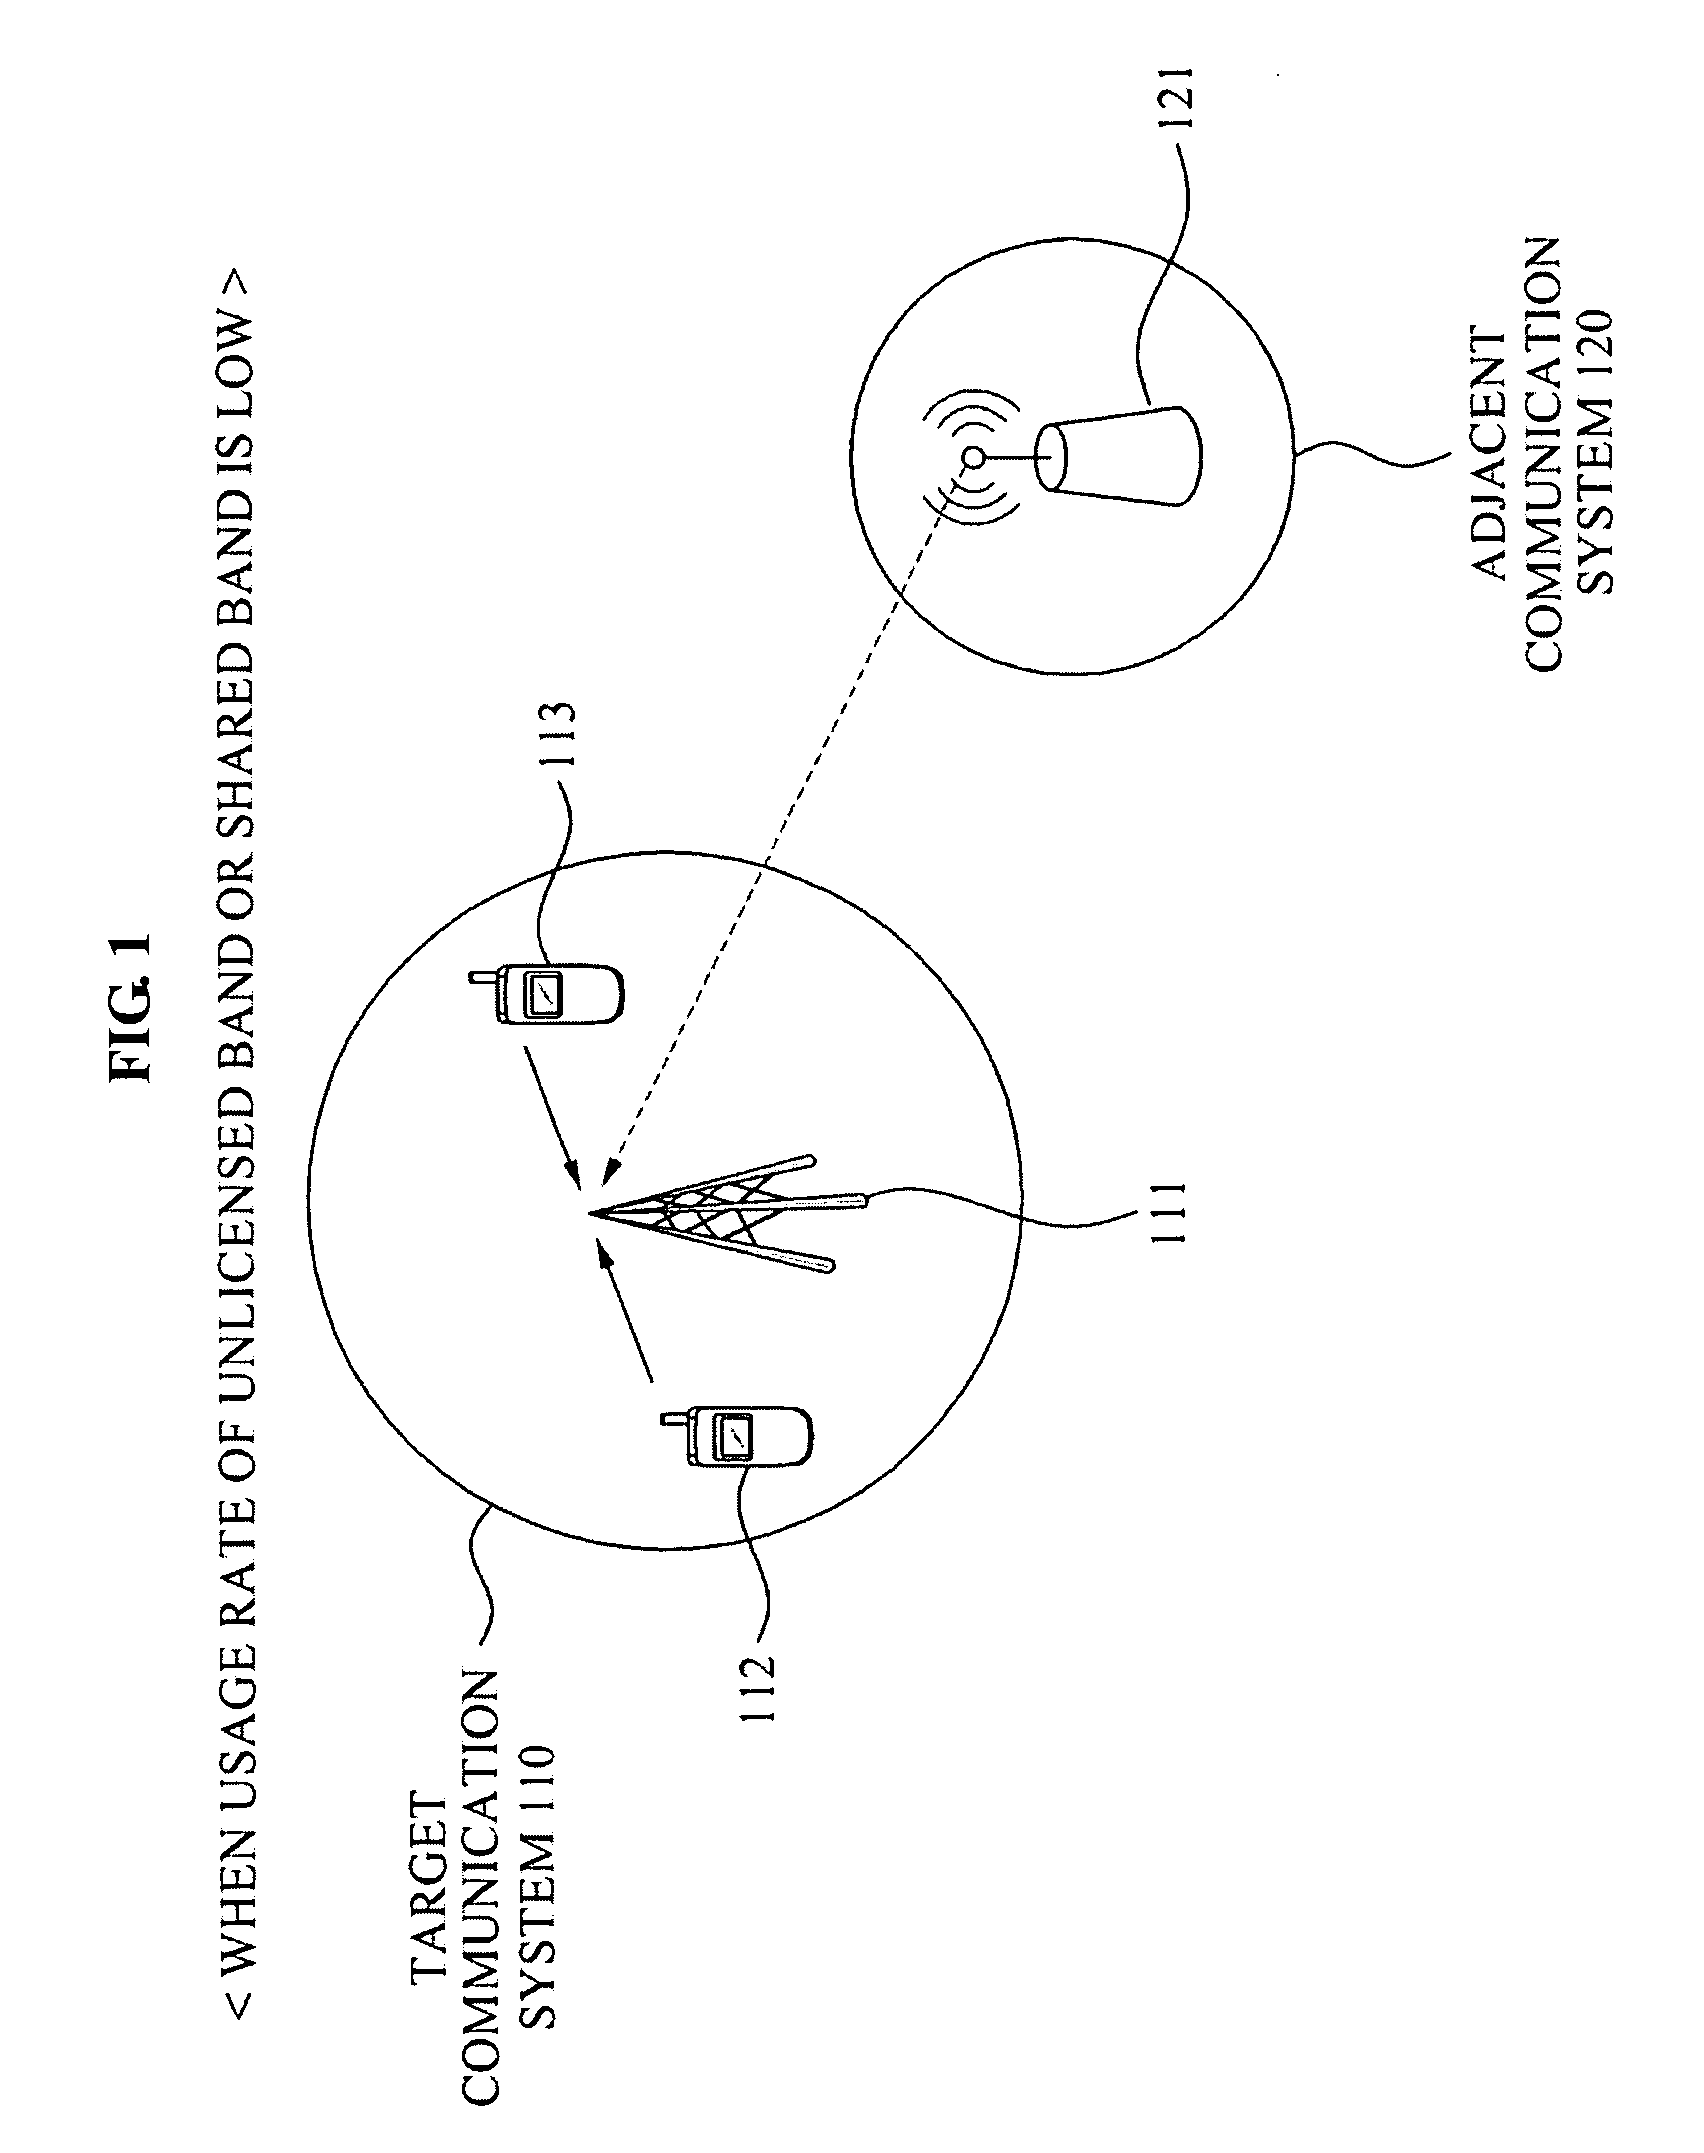 Method and apparatus of controlling access mode for communication system using shared or unlicensed band